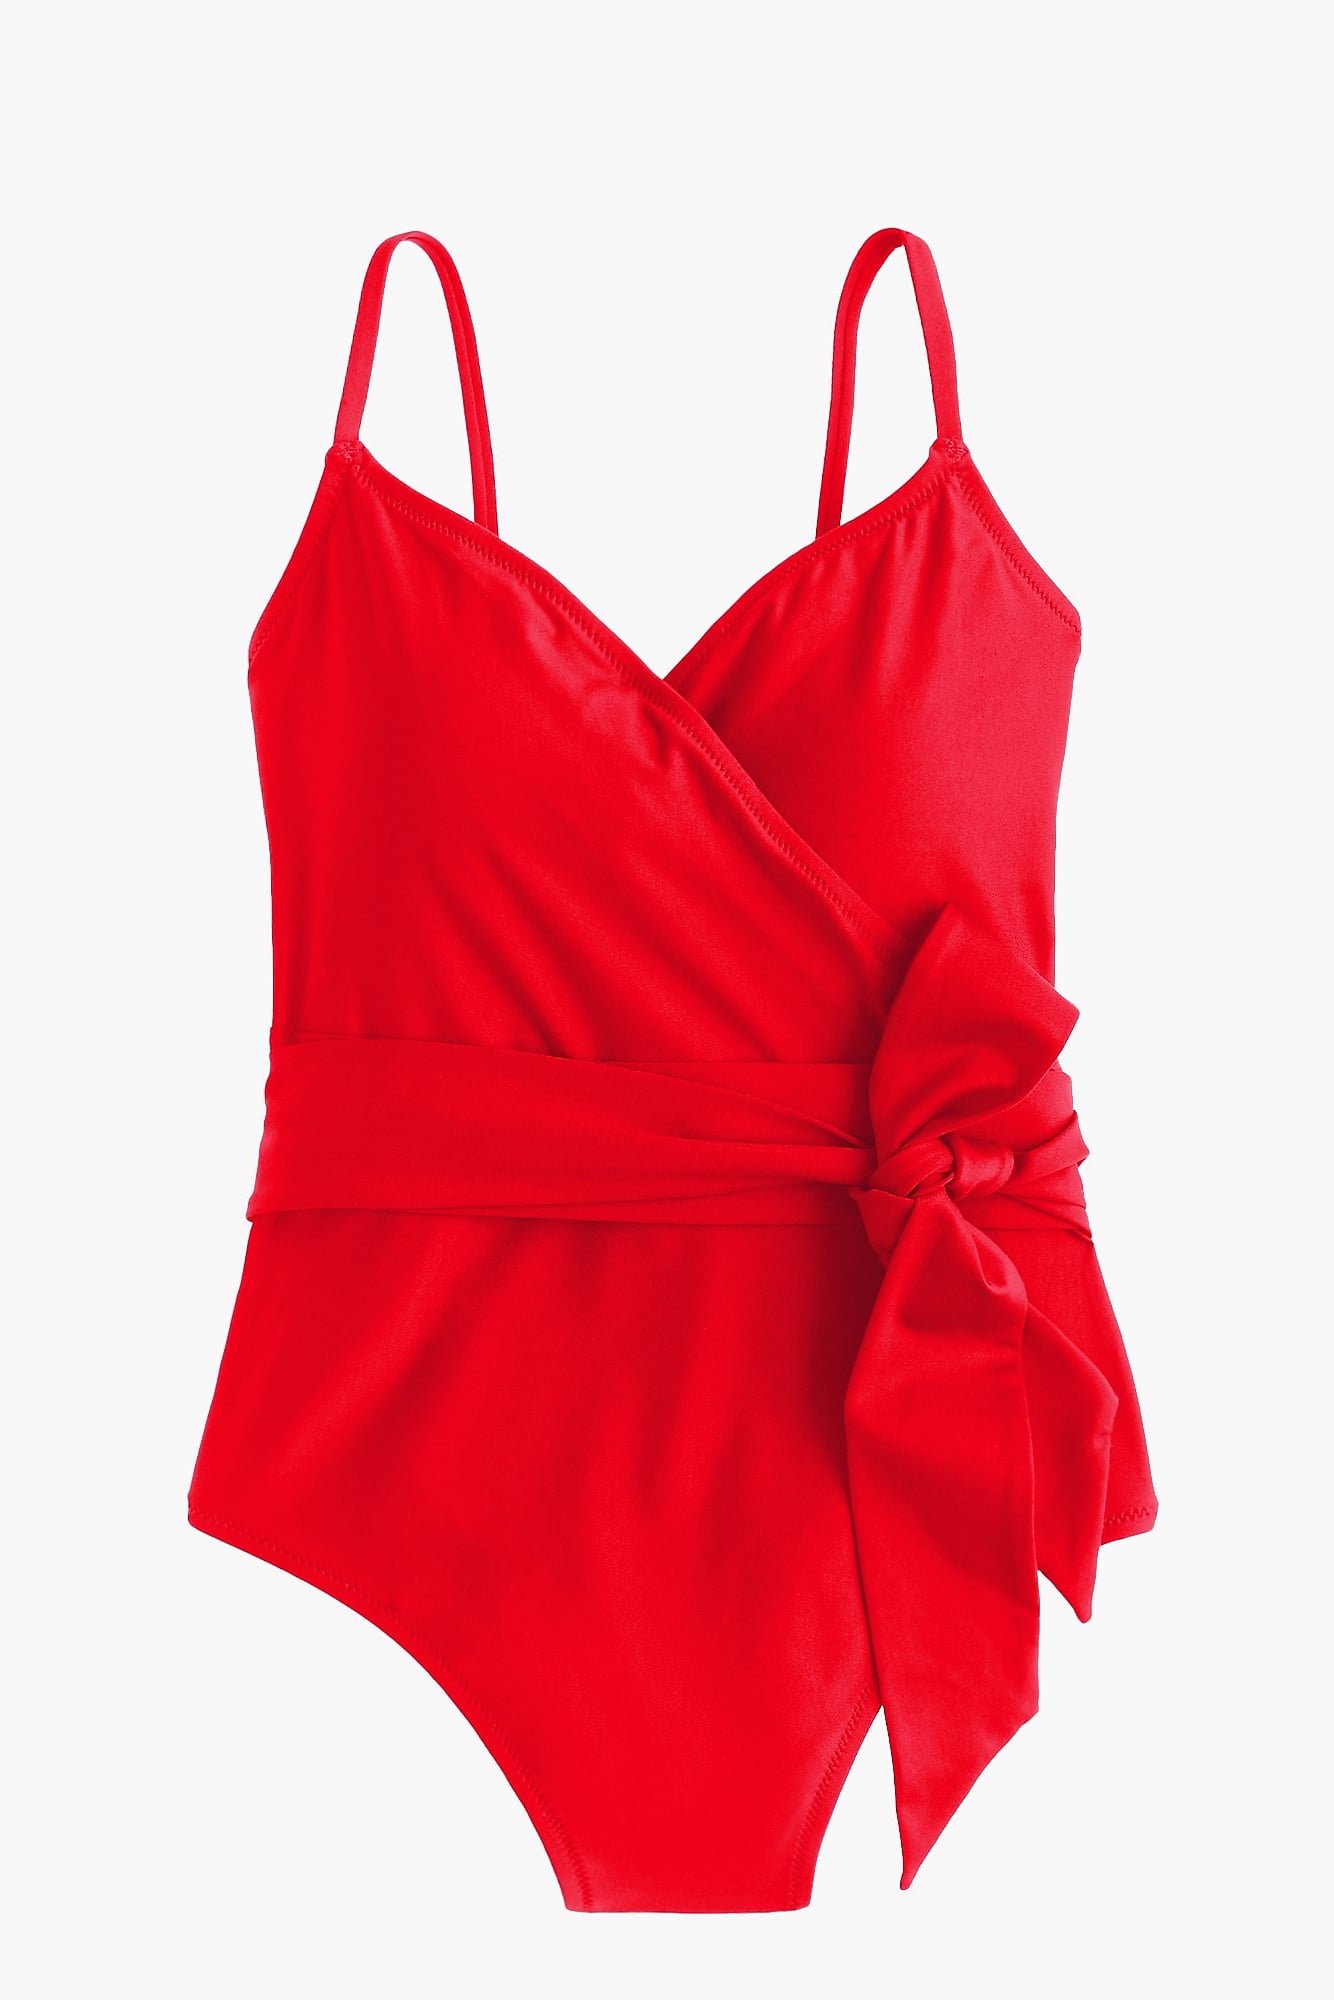 J Crew V Neck Wrap One Piece Swimsuit The Hands Down Best One Piece Swimsuits For Your Body Popsugar Fashion Photo 22